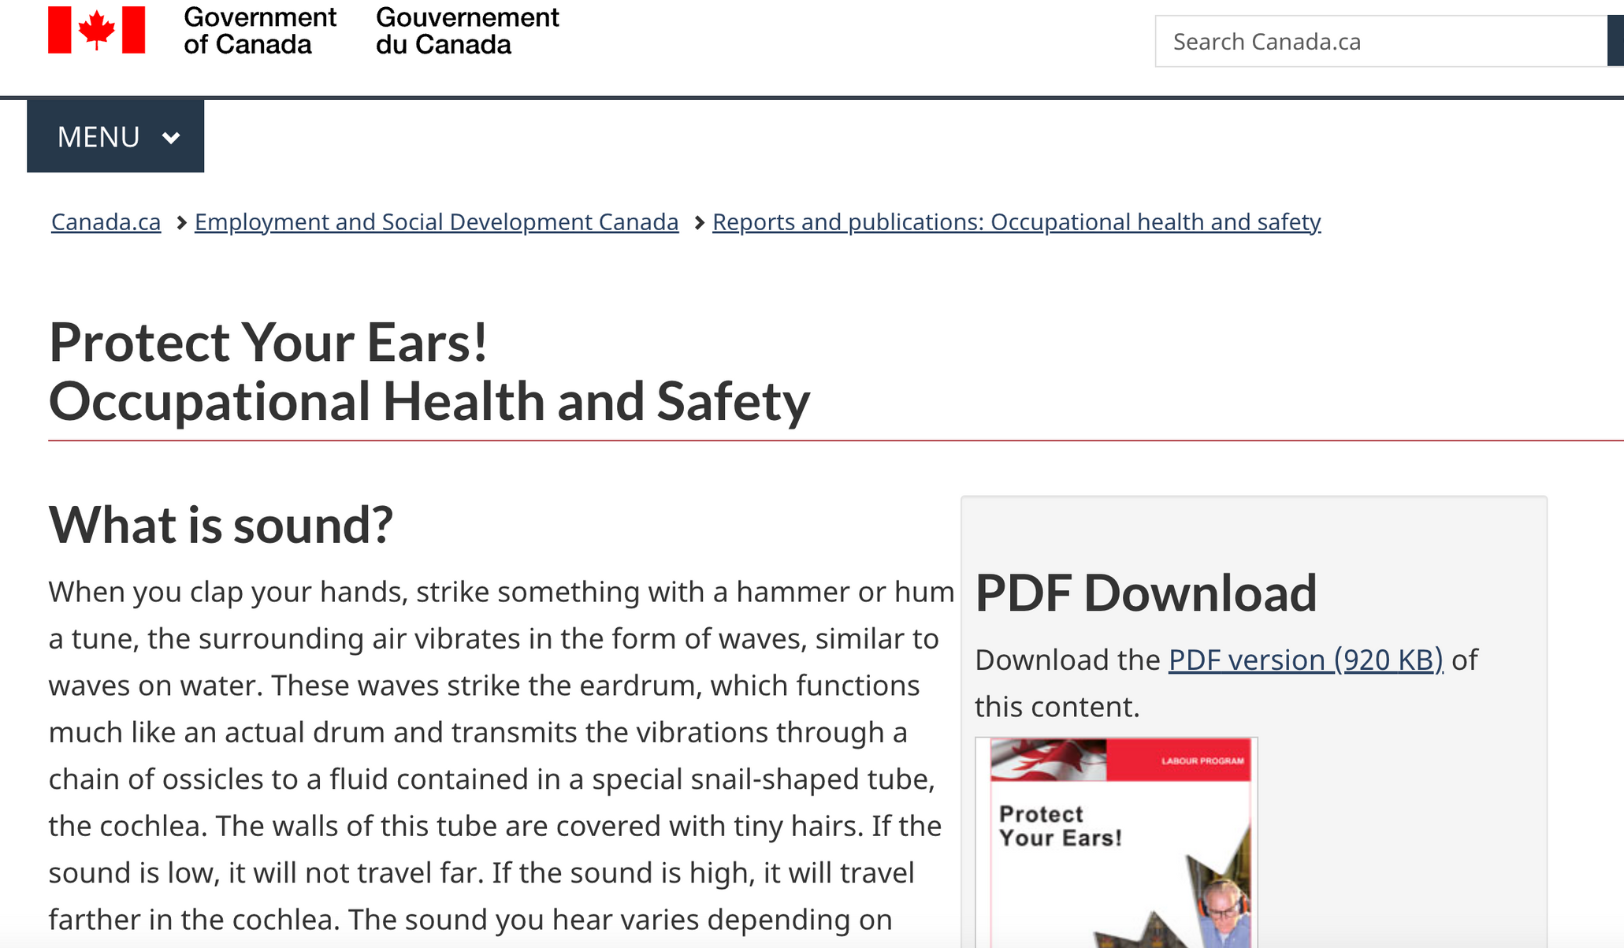 Protect Your Ears!